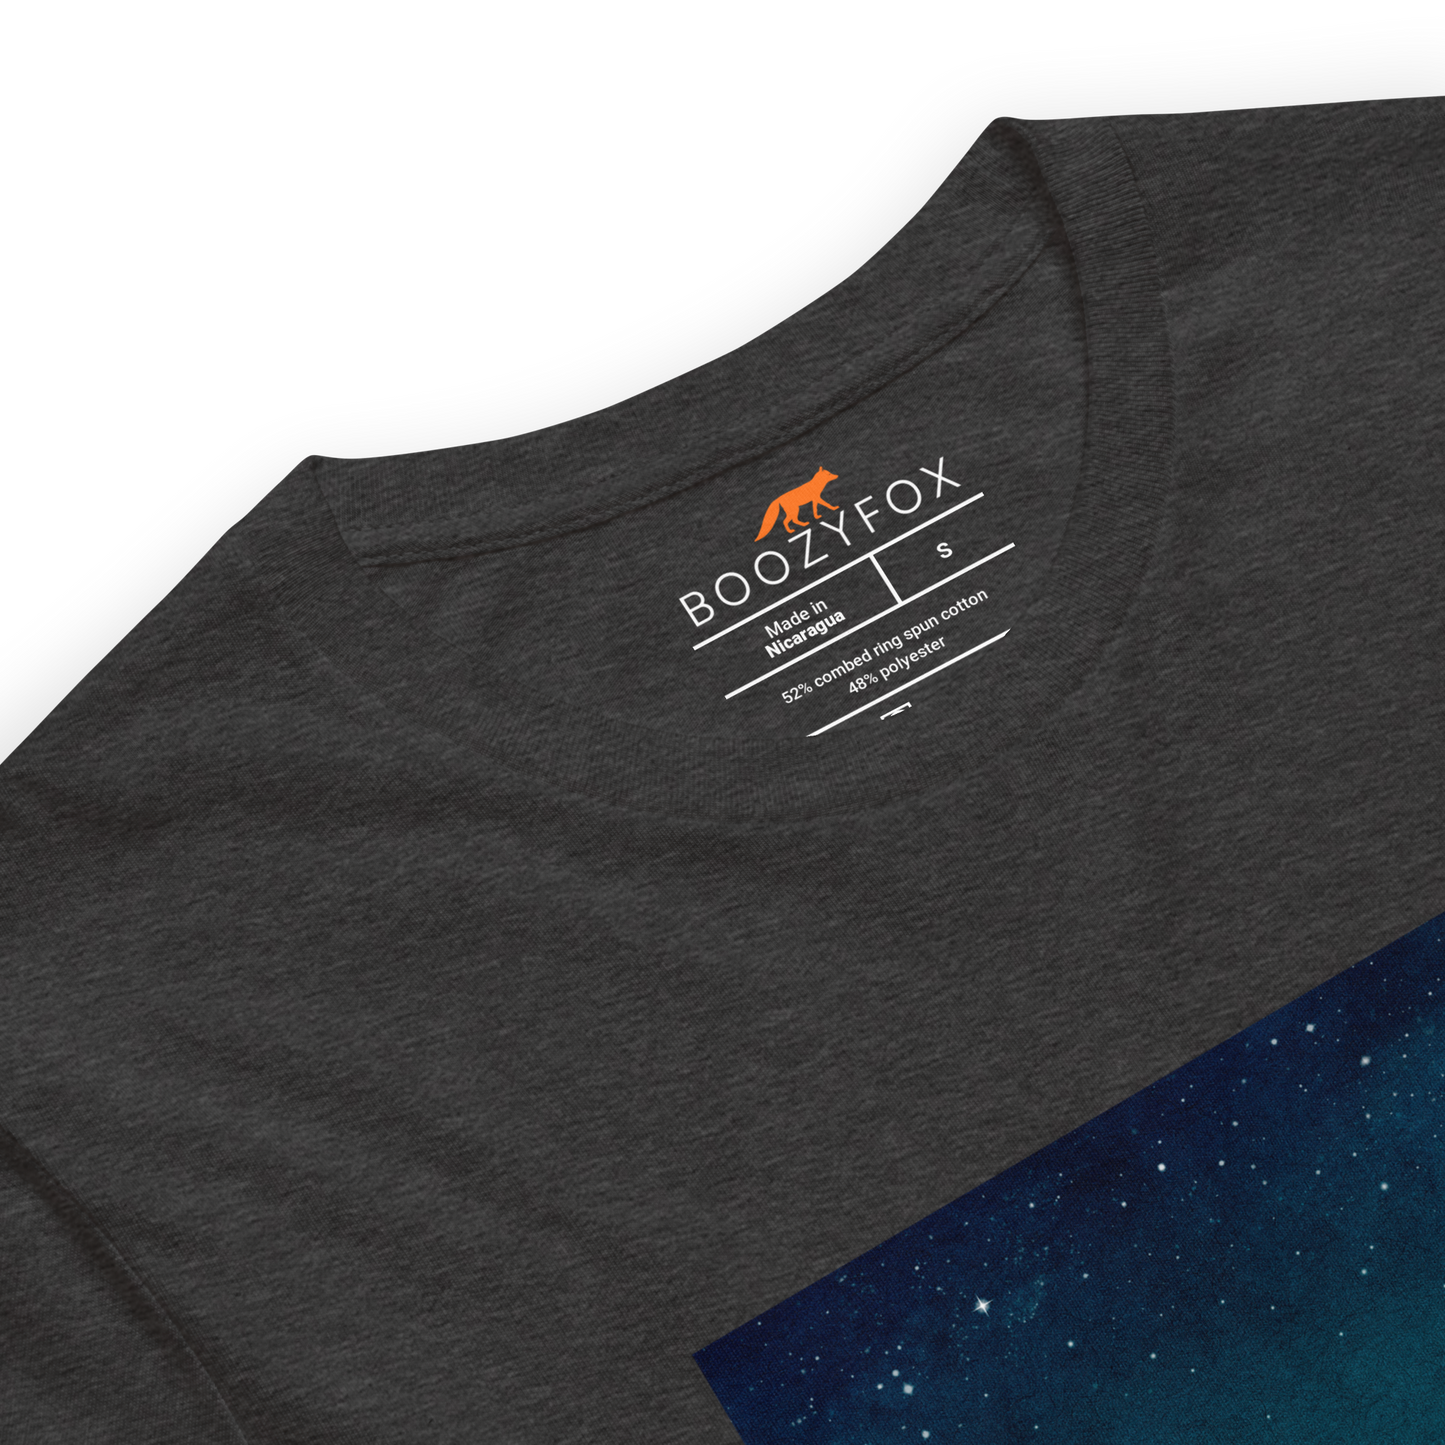 Product details of a Dark Grey Heather Premium Whale T-Shirt featuring a majestic Whale Under The Moon graphic on the chest - Cool Graphic Whale Tees - Boozy Fox